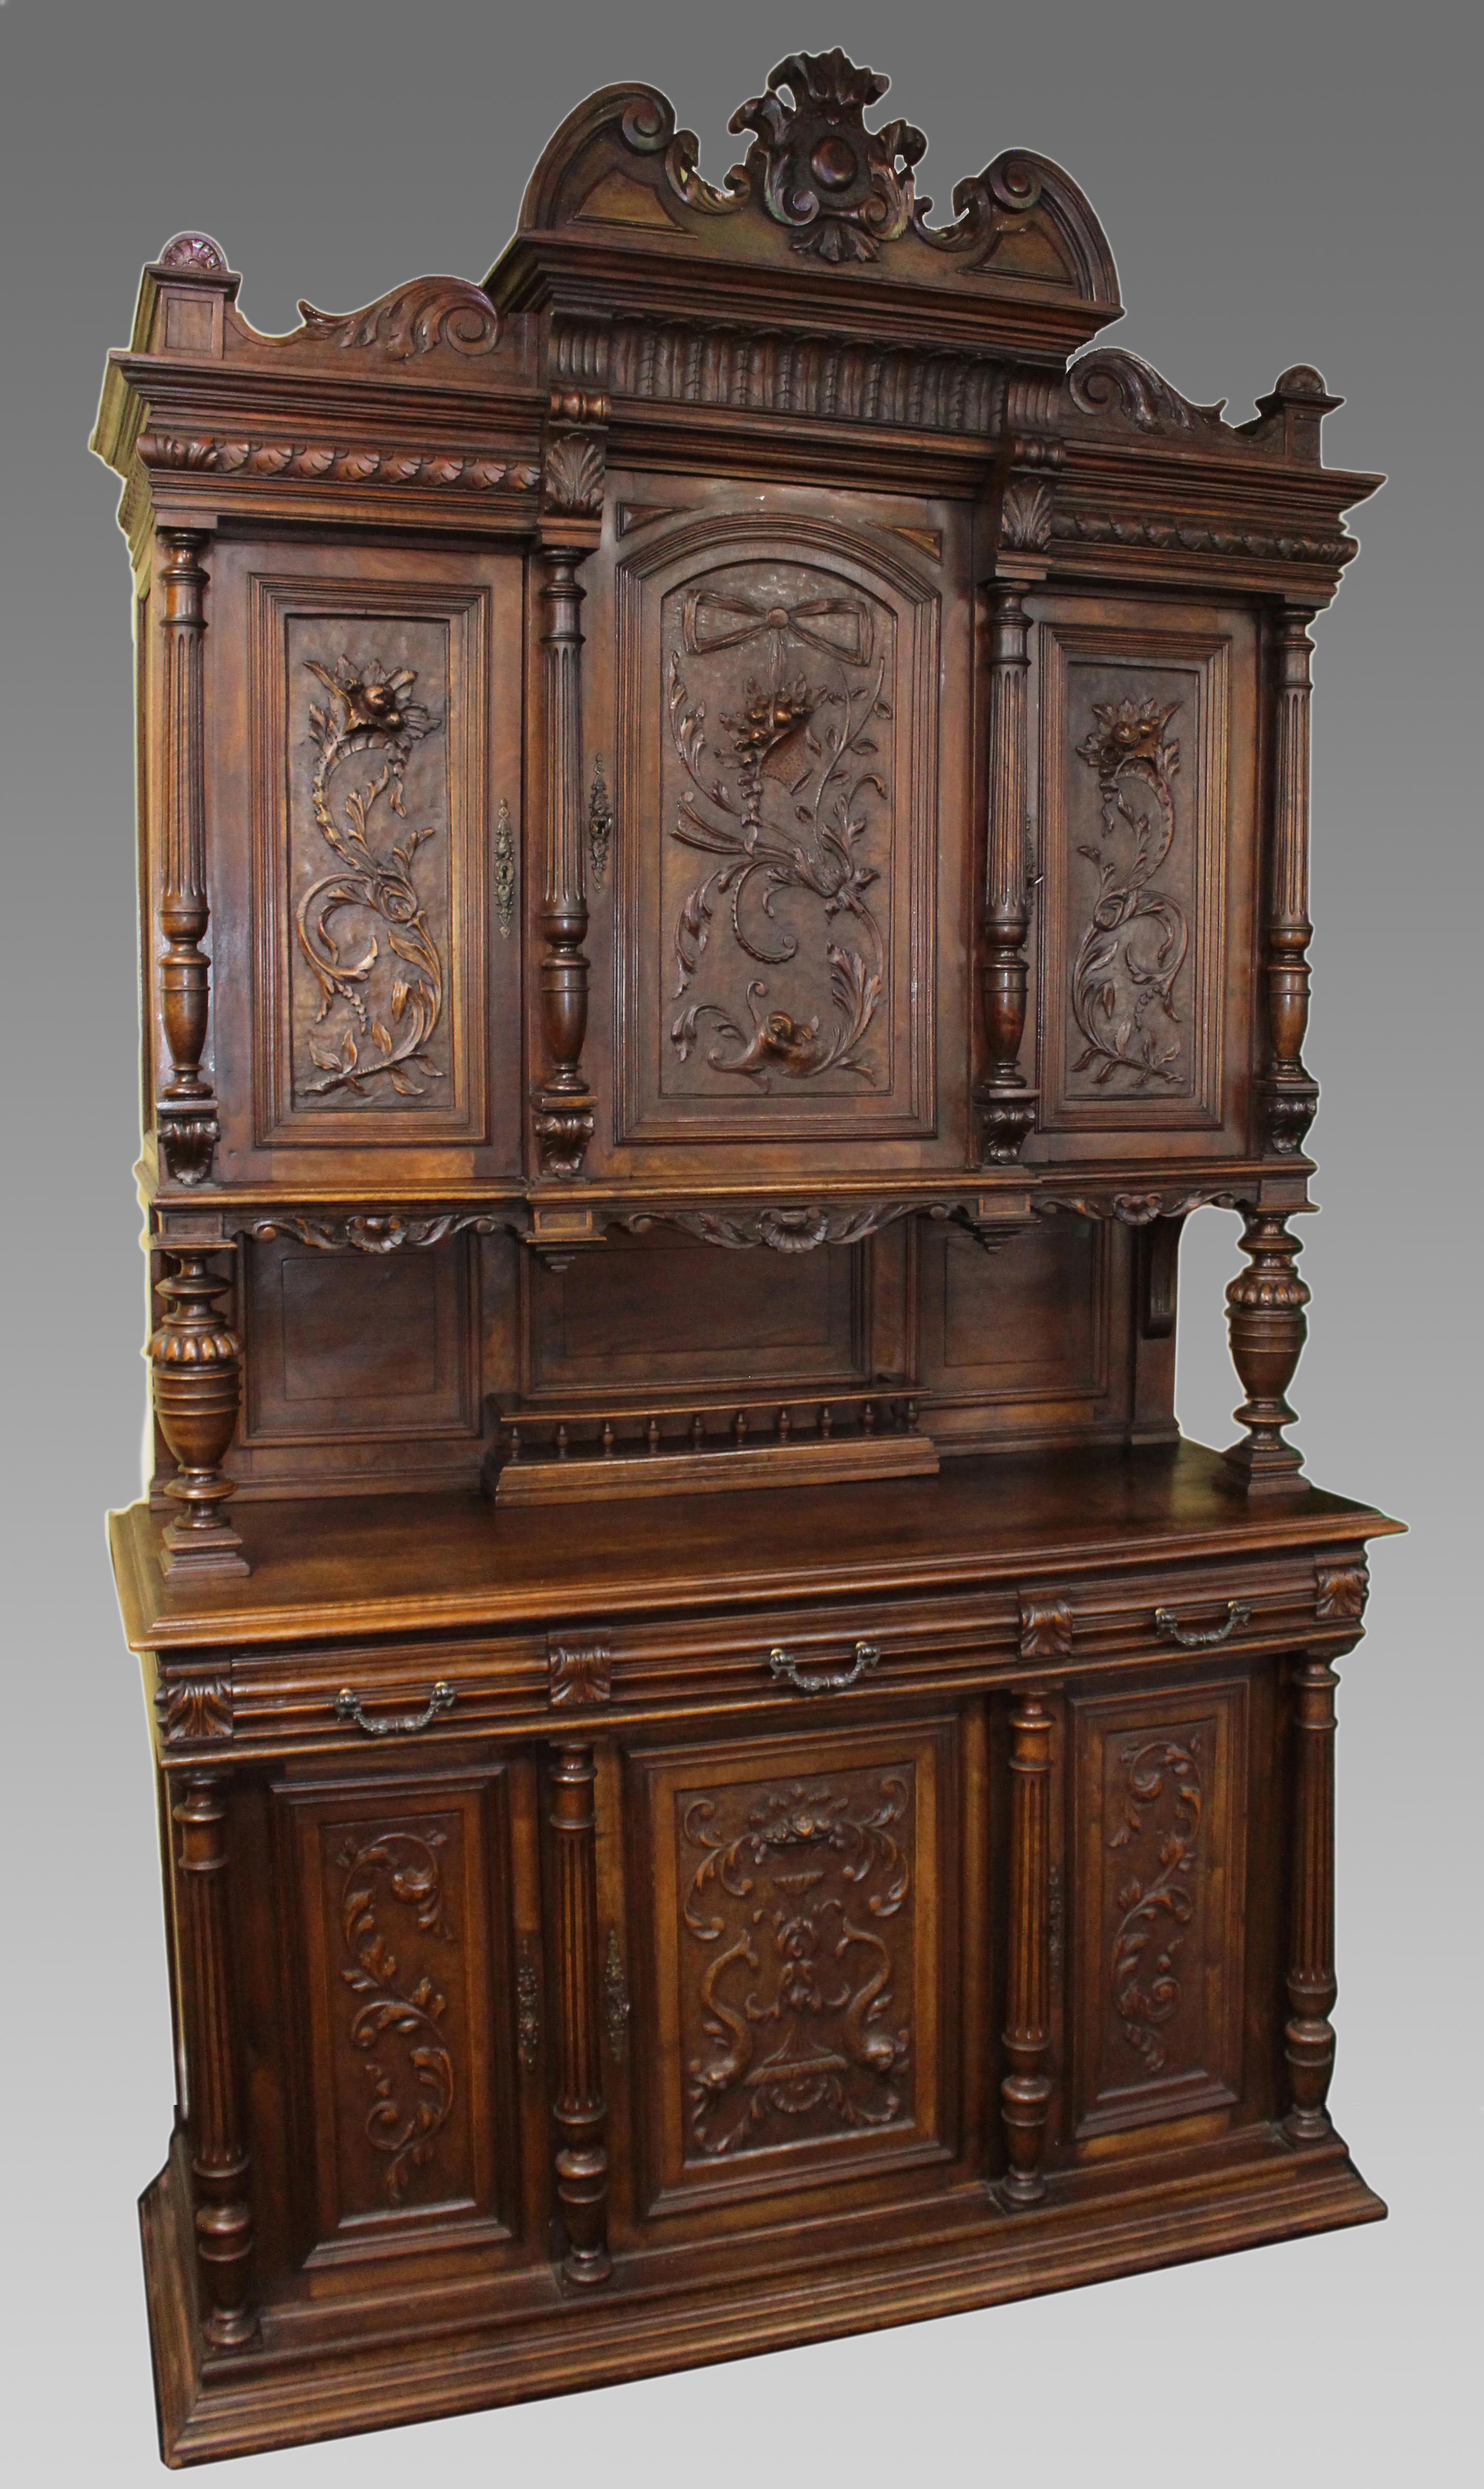 Period c.1900, French

Wood Walnut

Condition Offered in good original condition. Good colour and patina to the wood. A few little old woodworm holes to the upper section, though fully treated. Very heavy
 

 

We are pleased to offer a